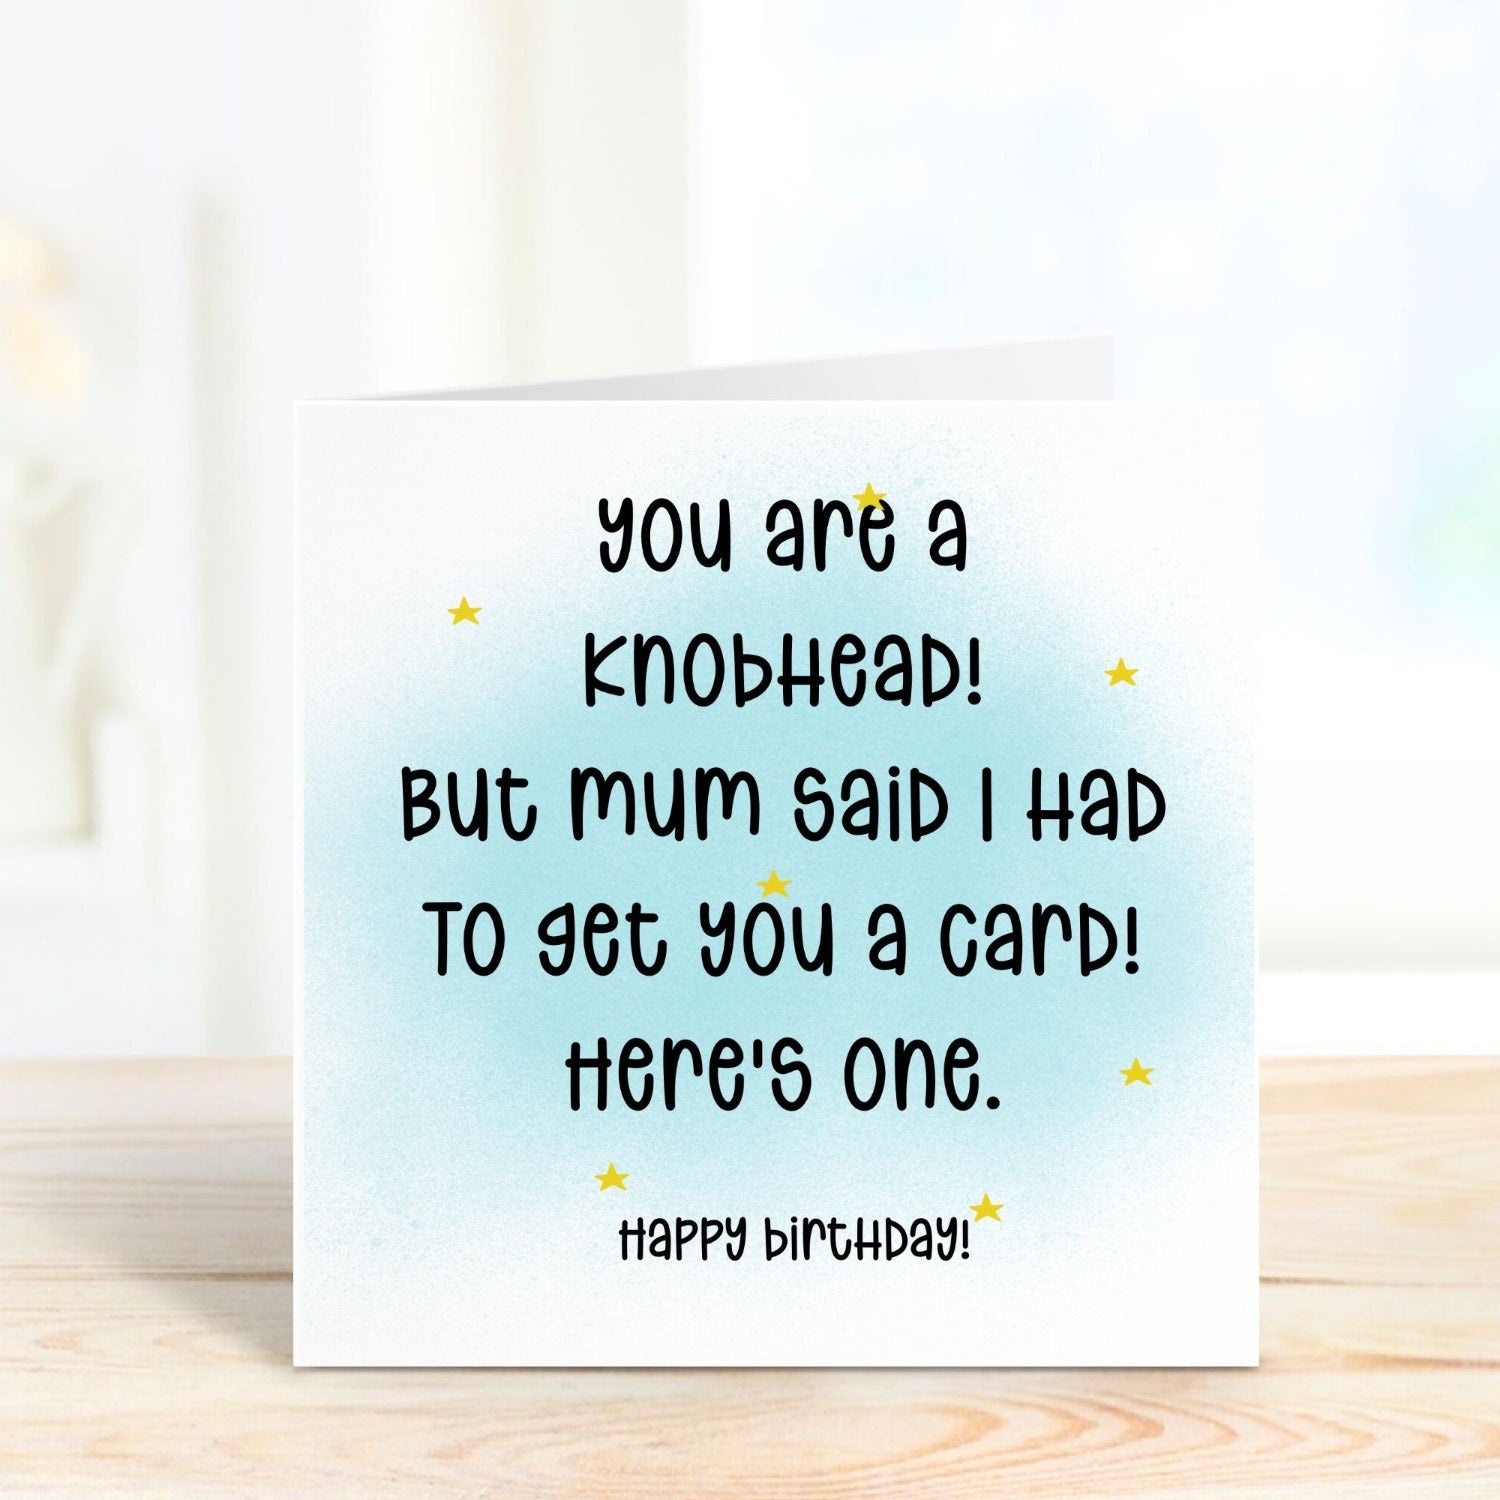 personalised birthday card for brother with humorous quote